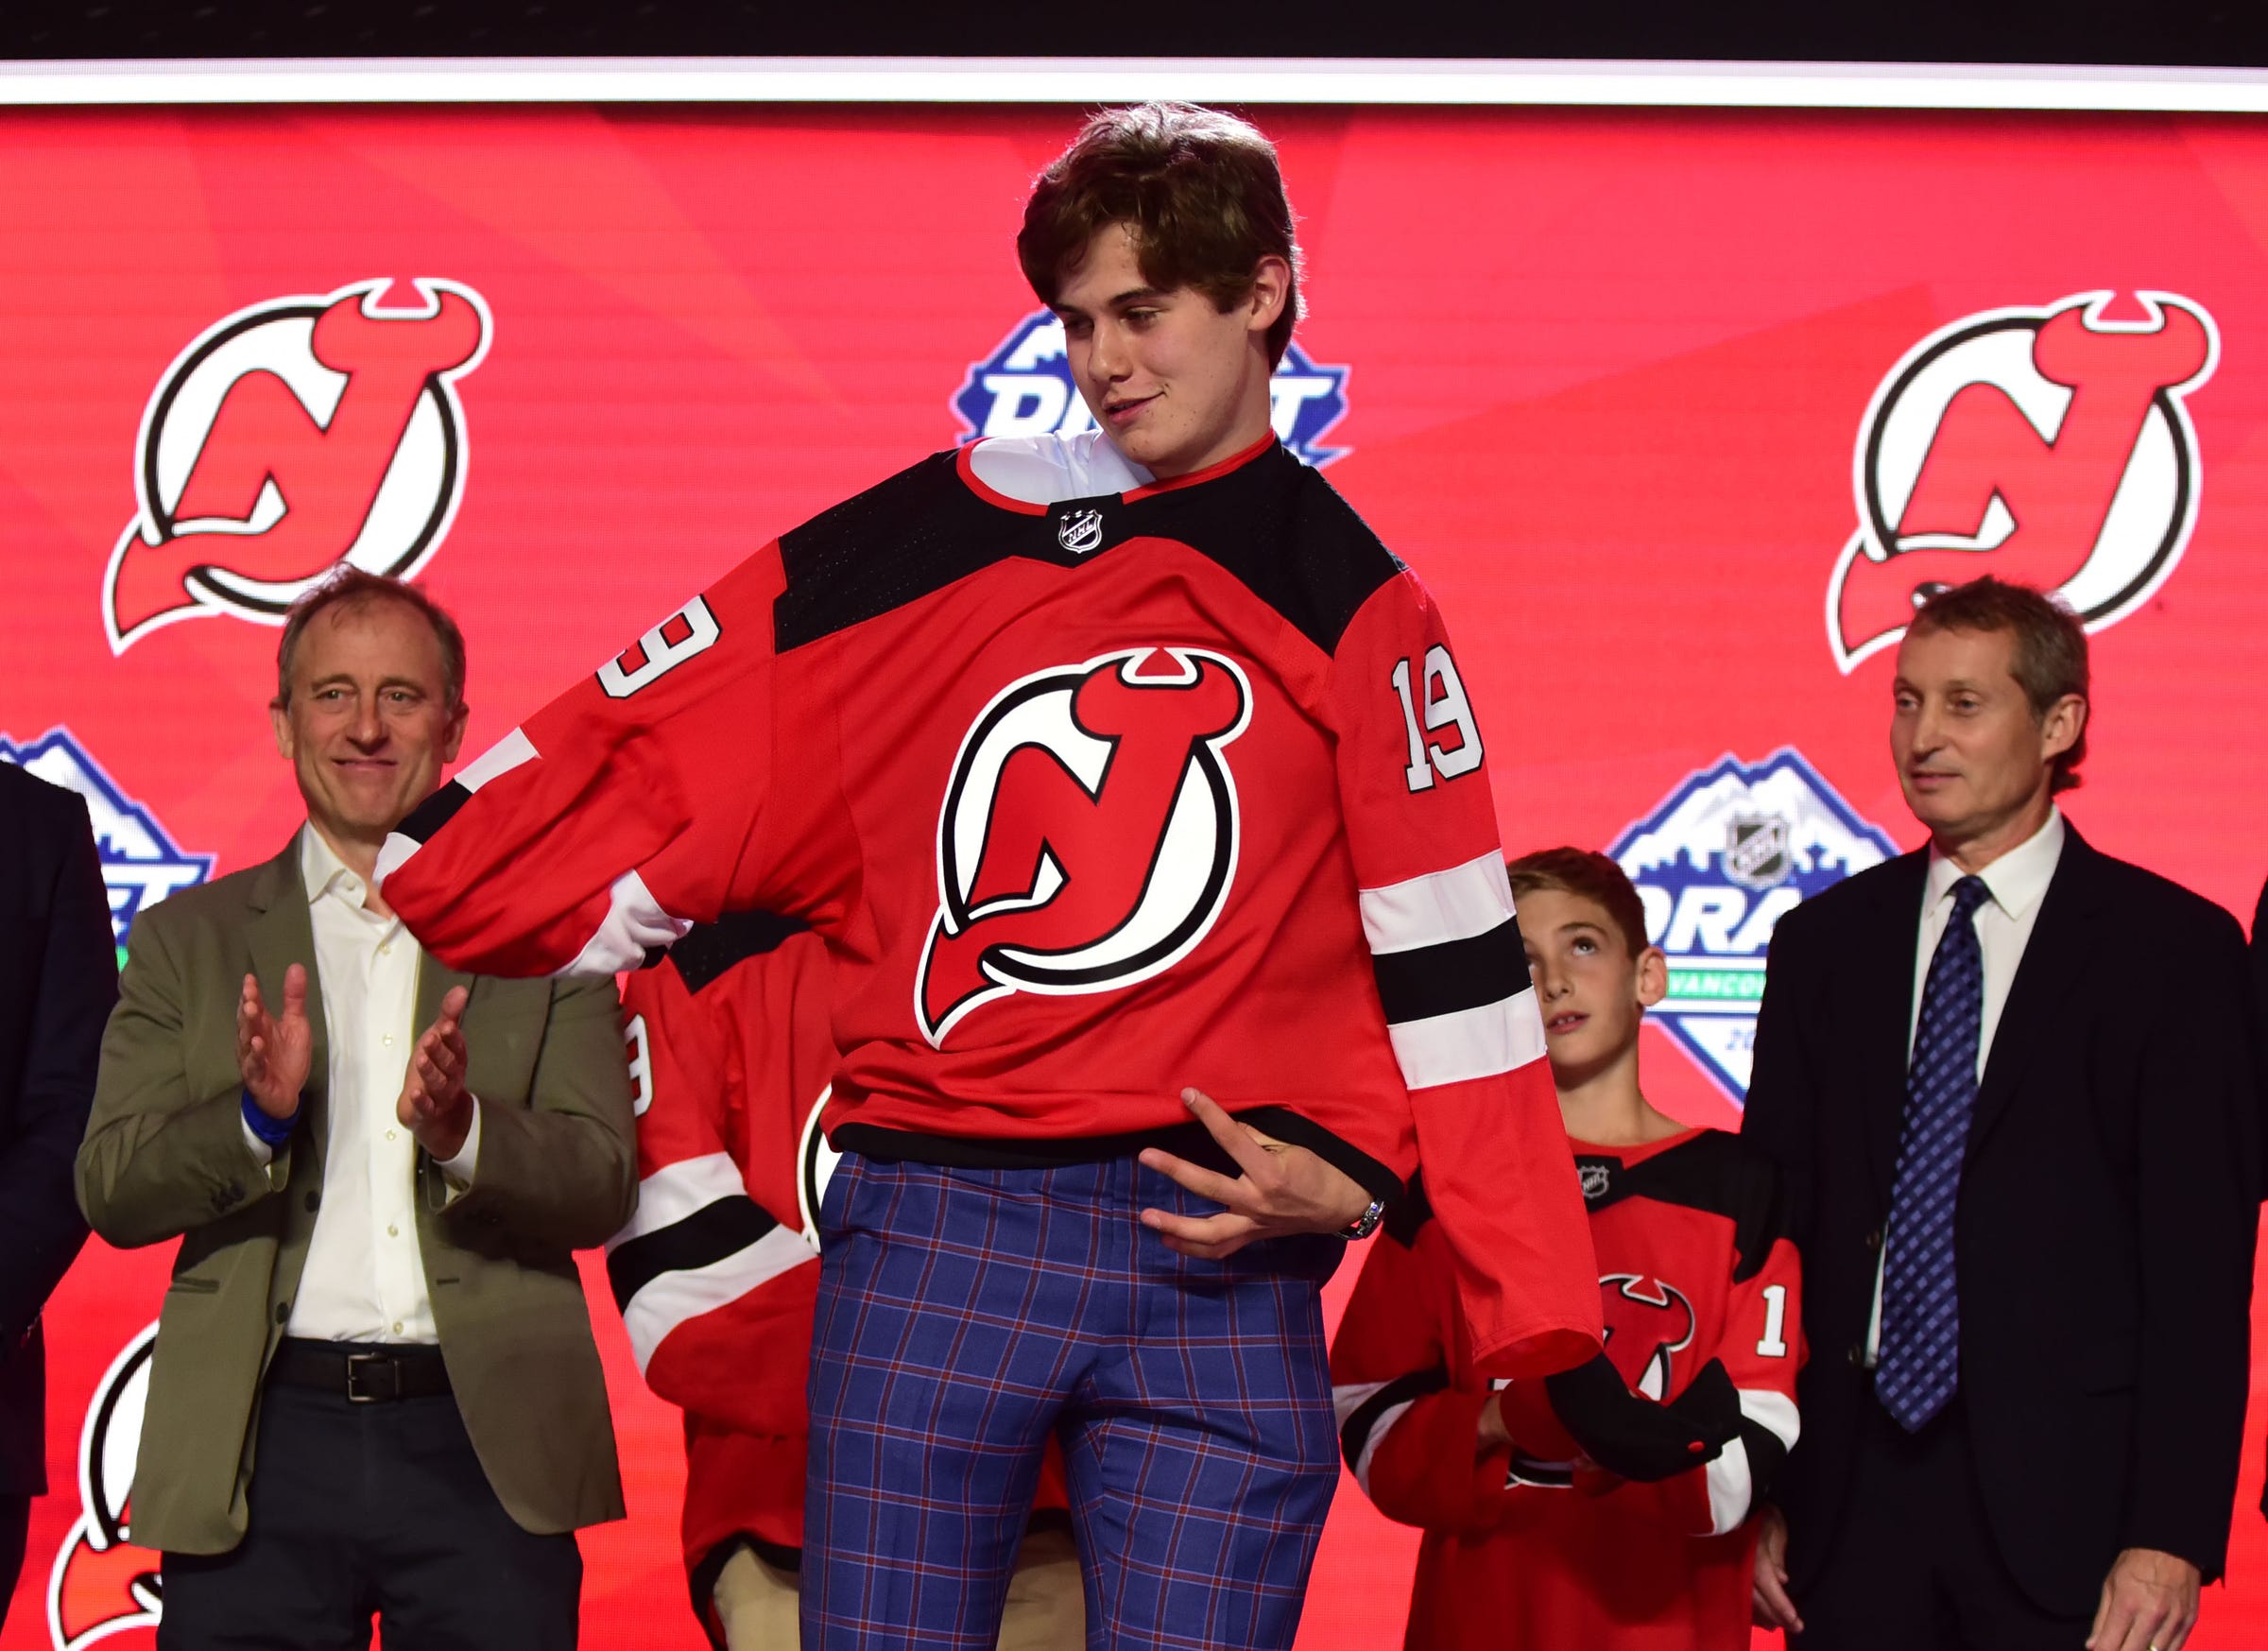 new jersey devils one jersey